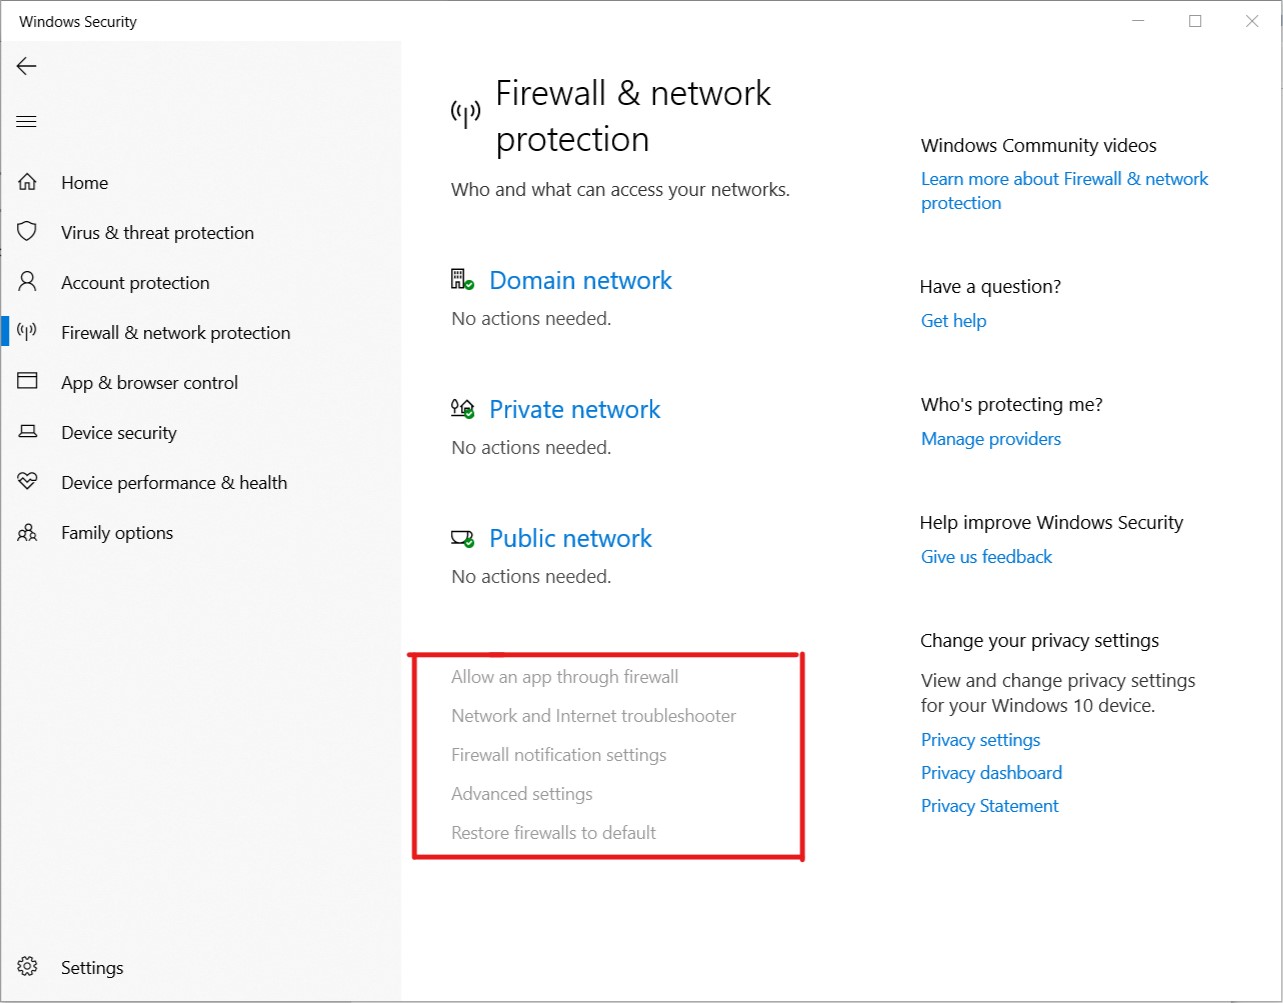 Firewall and Network Protection tab options are all greyed out 08a47528-7671-4bd1-aaf8-88d845c532ea?upload=true.jpg